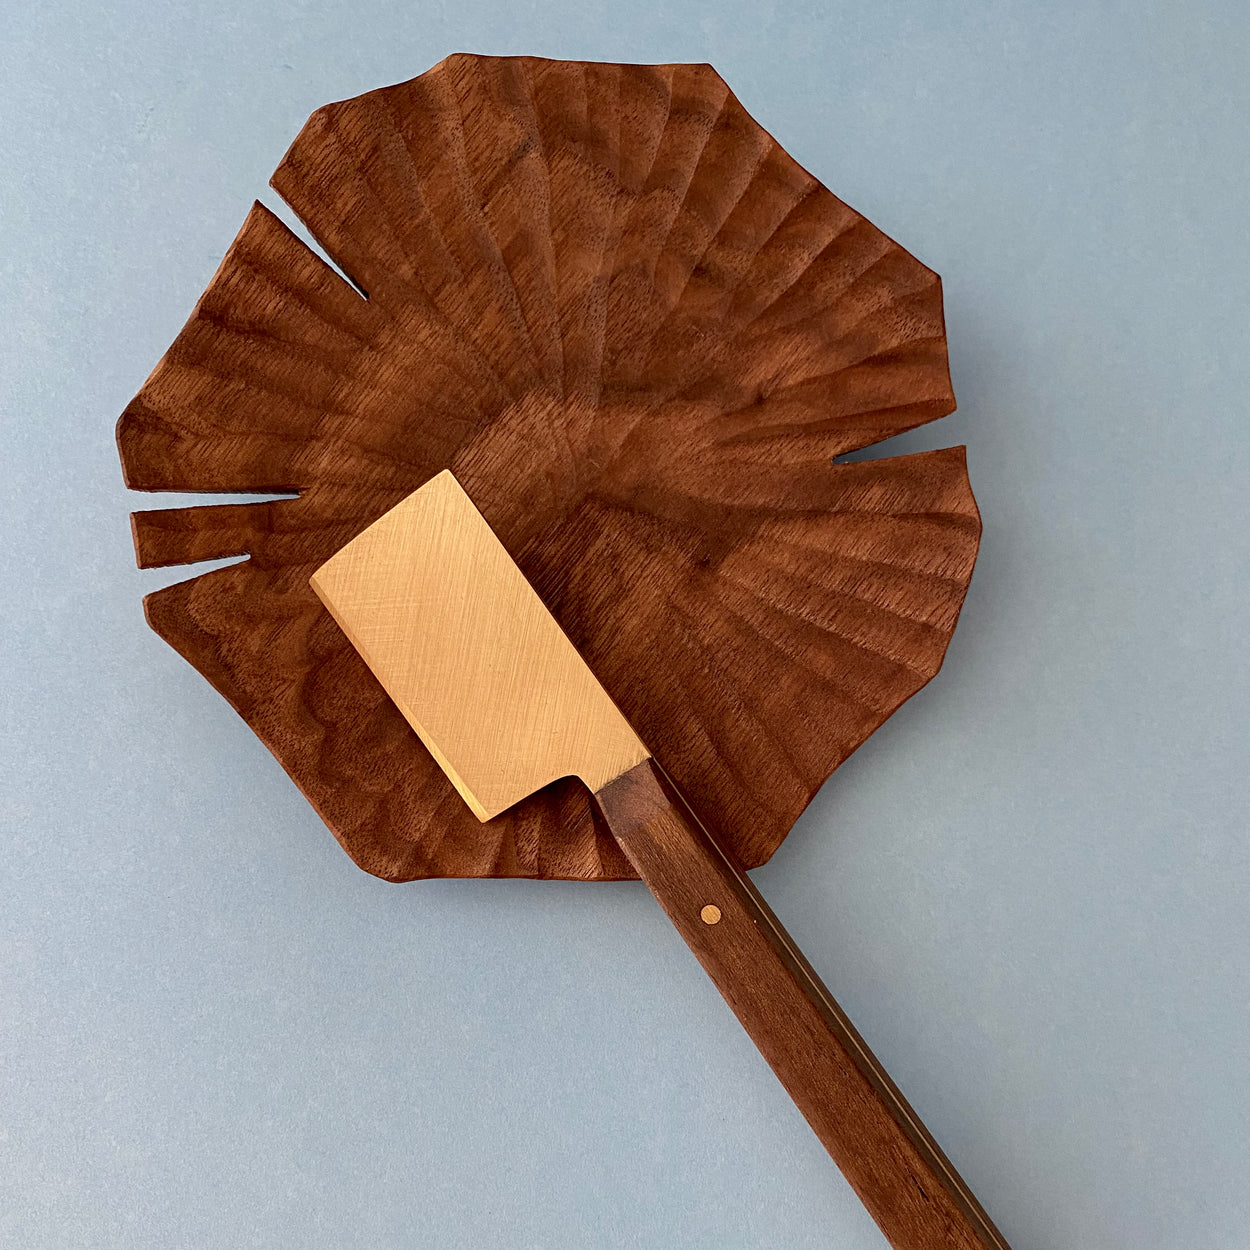 Handmade Walnut & Brass cheese knife against blue background with Lotus leaf carved wood plate